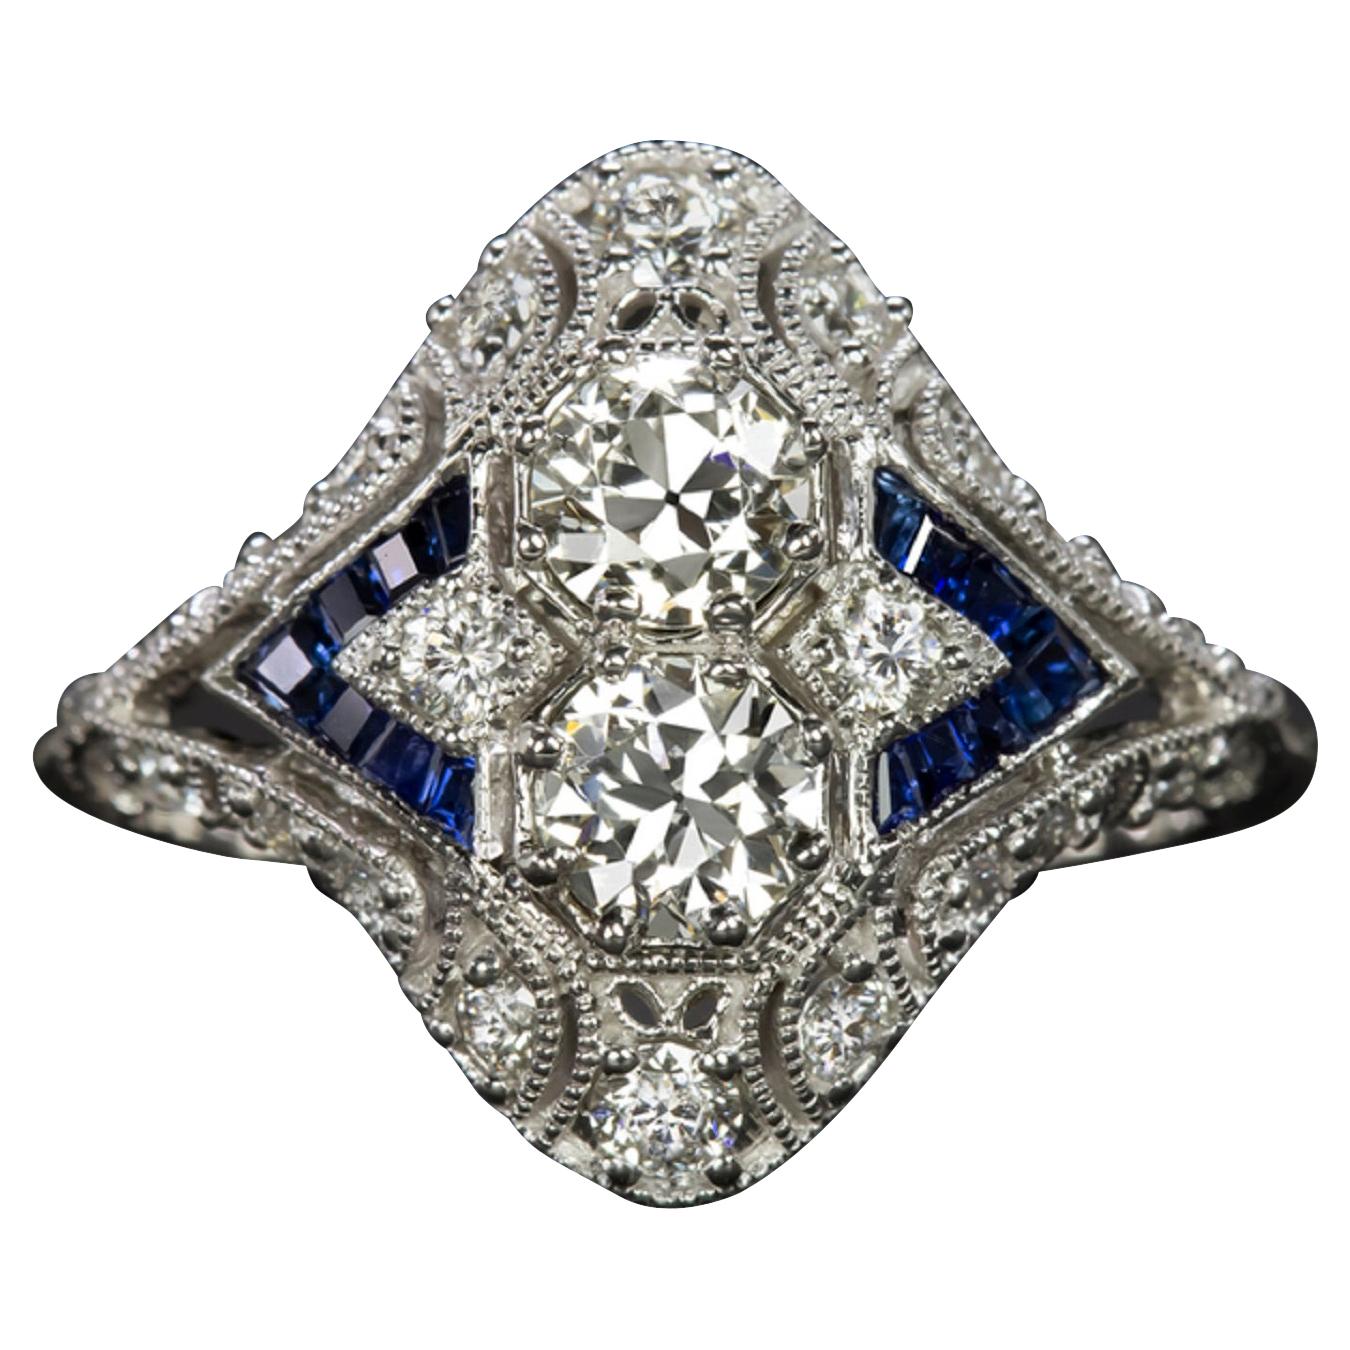 Old Cut Diamond Blue Sapphire Carre Filigree Cocktail Ring